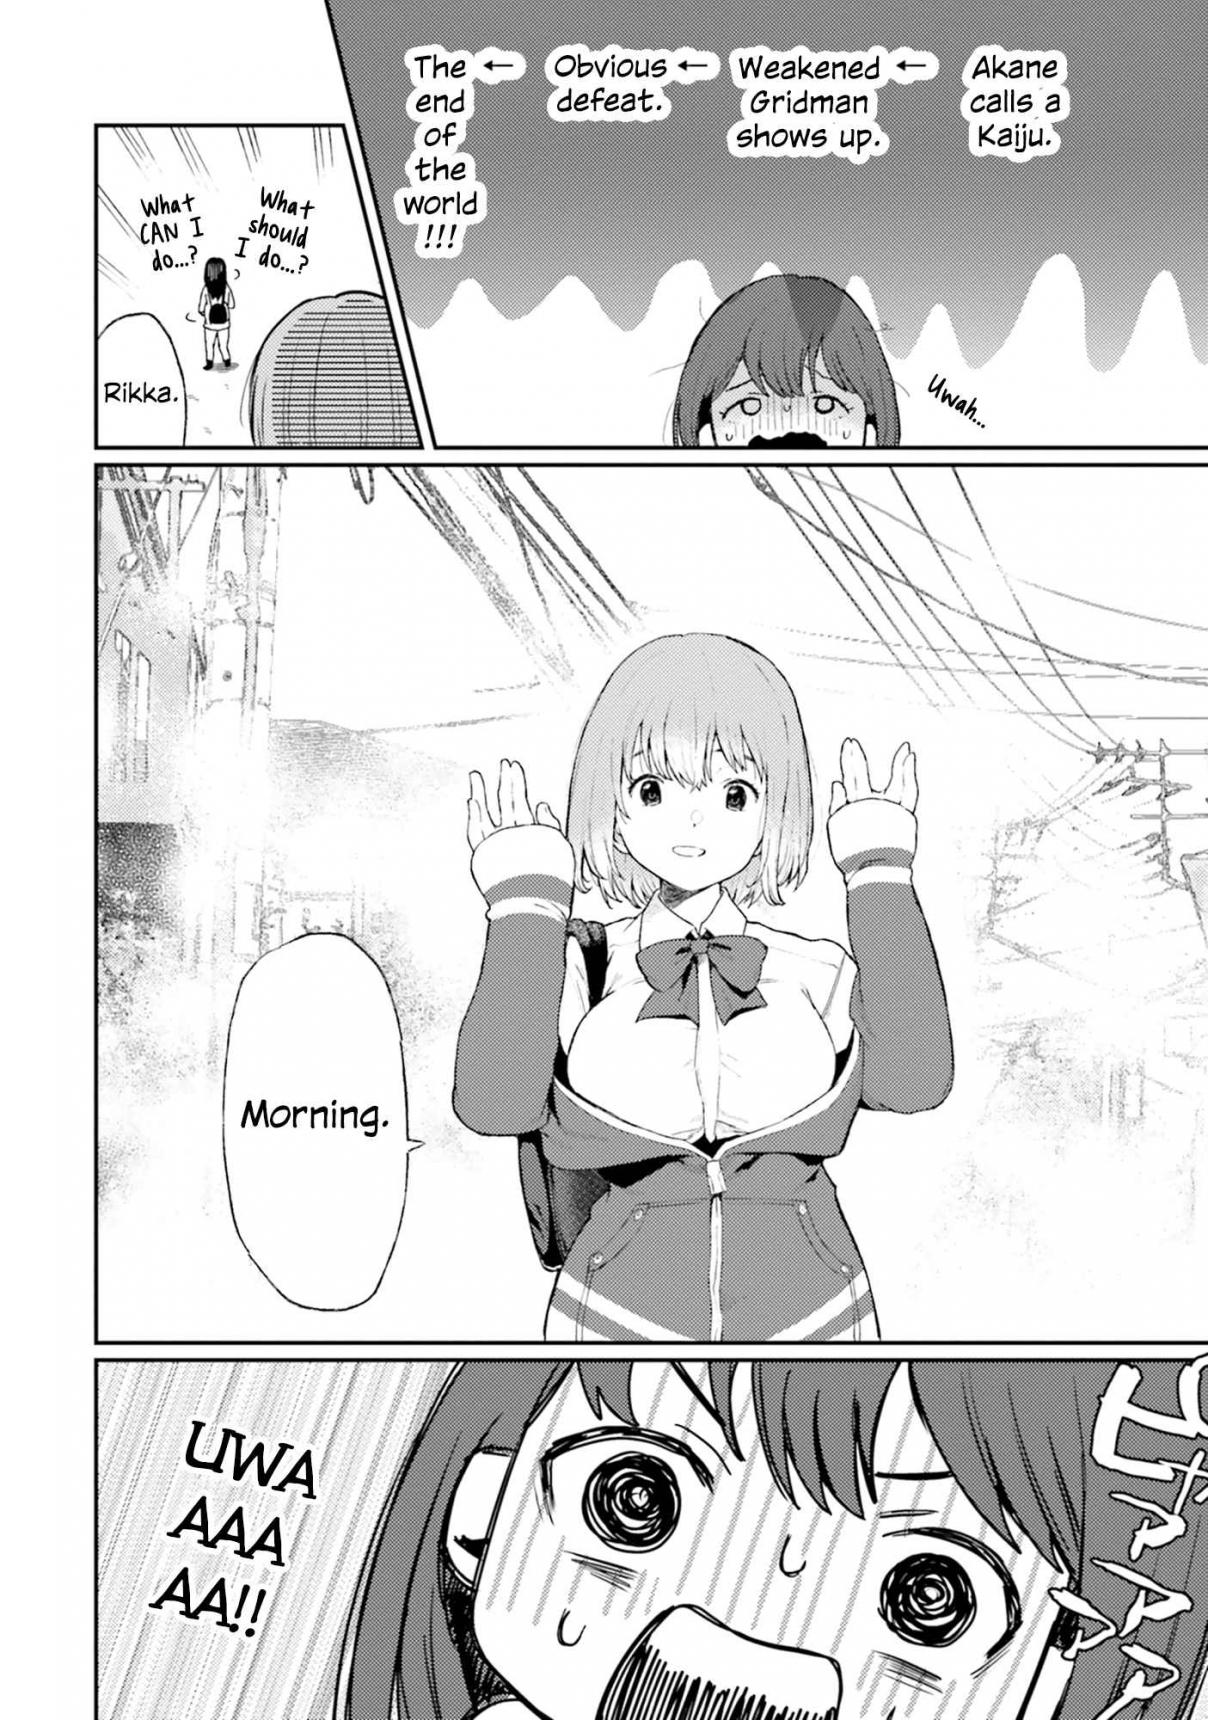 SSSS.GRIDMAN ANTHOLOGY 4. The End of The World...?